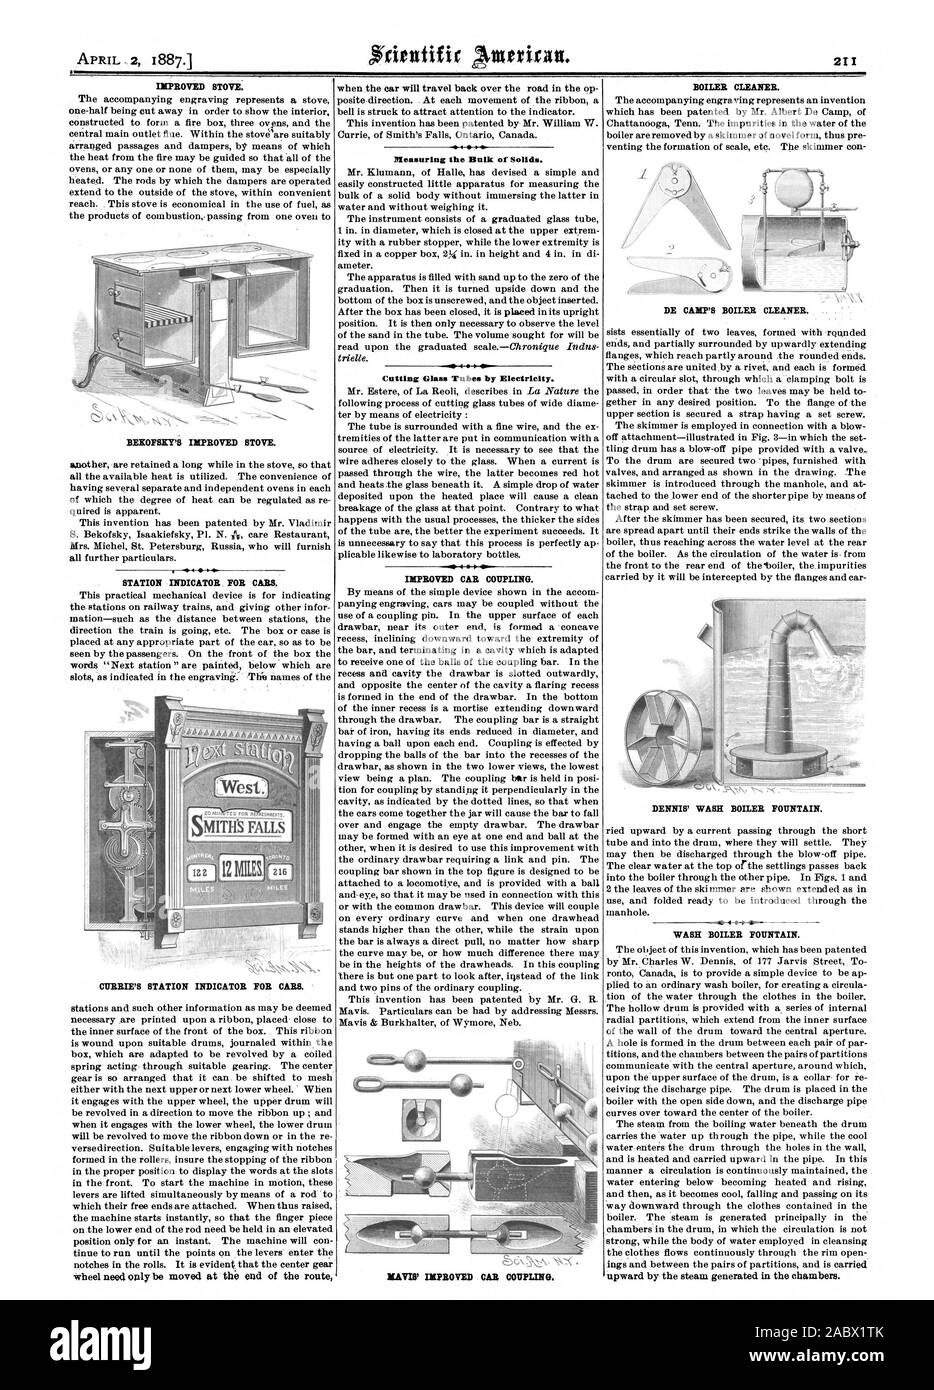 IMPROVED STOVE. STATION INDICATOR FOR CARS. wheel need only be moved at the end of the route Measuring the Bulk of Solids. Cutting Glass Tubes by Electricity. IMPROVED CAR COUPLING. BOILER CLEANER. DE CAMP'S BOILER CLEANER. DENNIS' WASH BOILER FOUNTAIN. WASH BOILER FOUNTAIN. MAVIS' IMPROVED CAR COUPLING. MITH'S FALLS CURRIE'S STATION INDICATOR FOR CARS., scientific american, 1887-04-02 Stock Photo